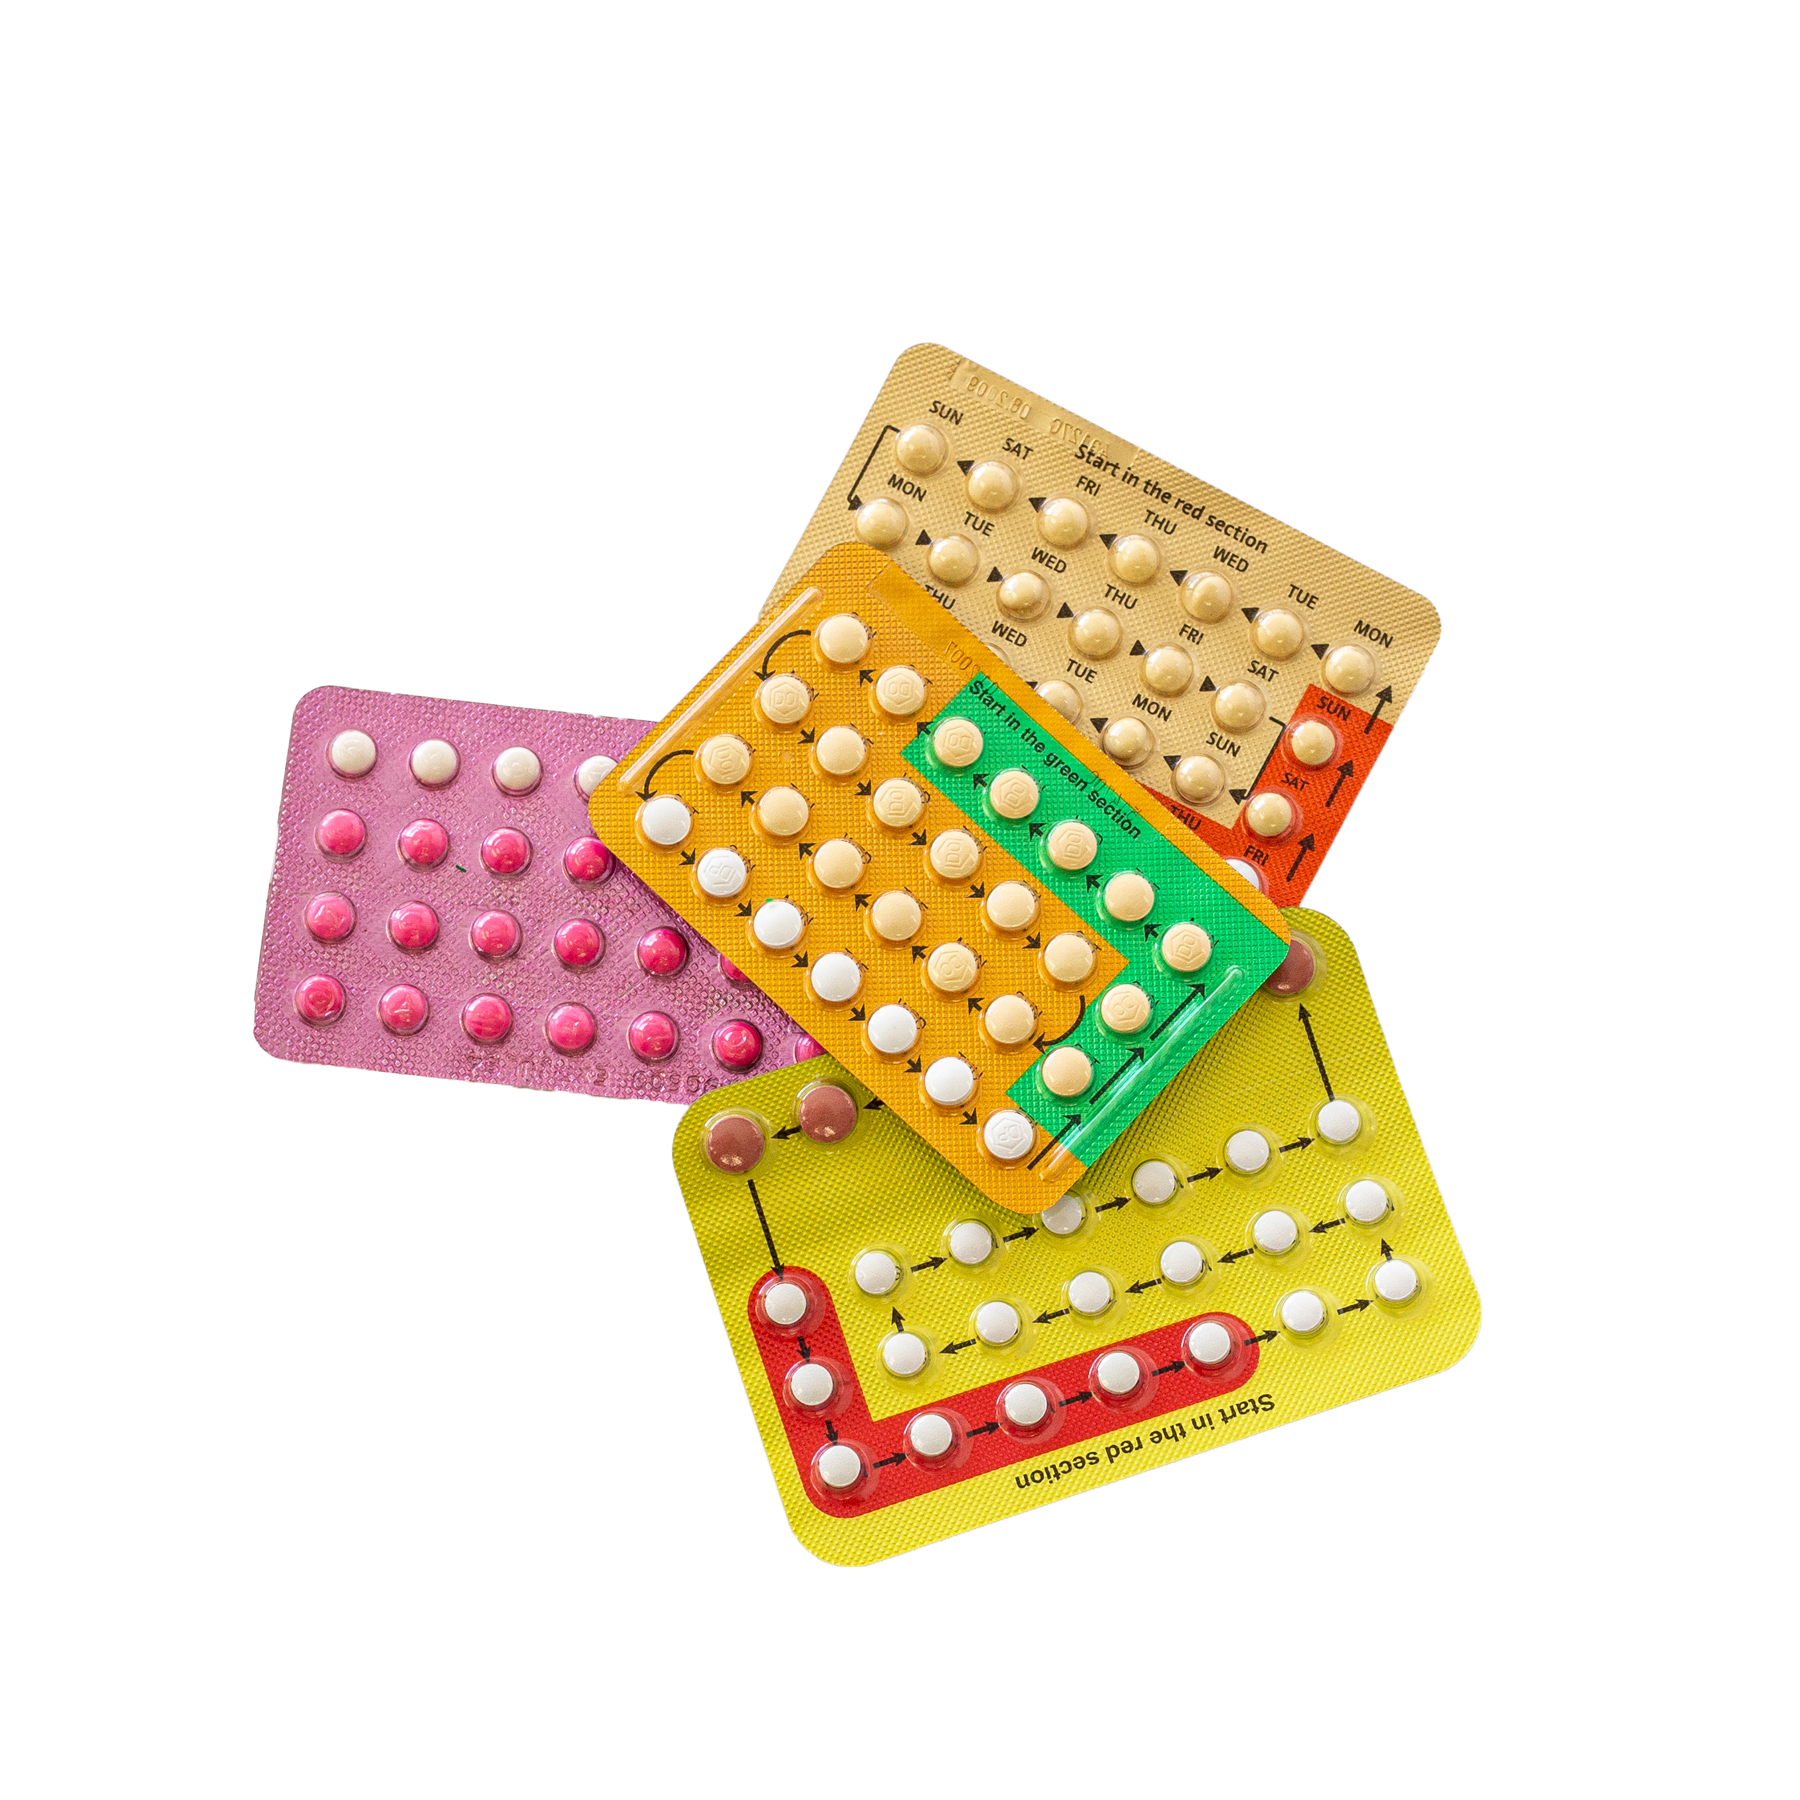 Withdrawal bleeding from birth control: What you need to know